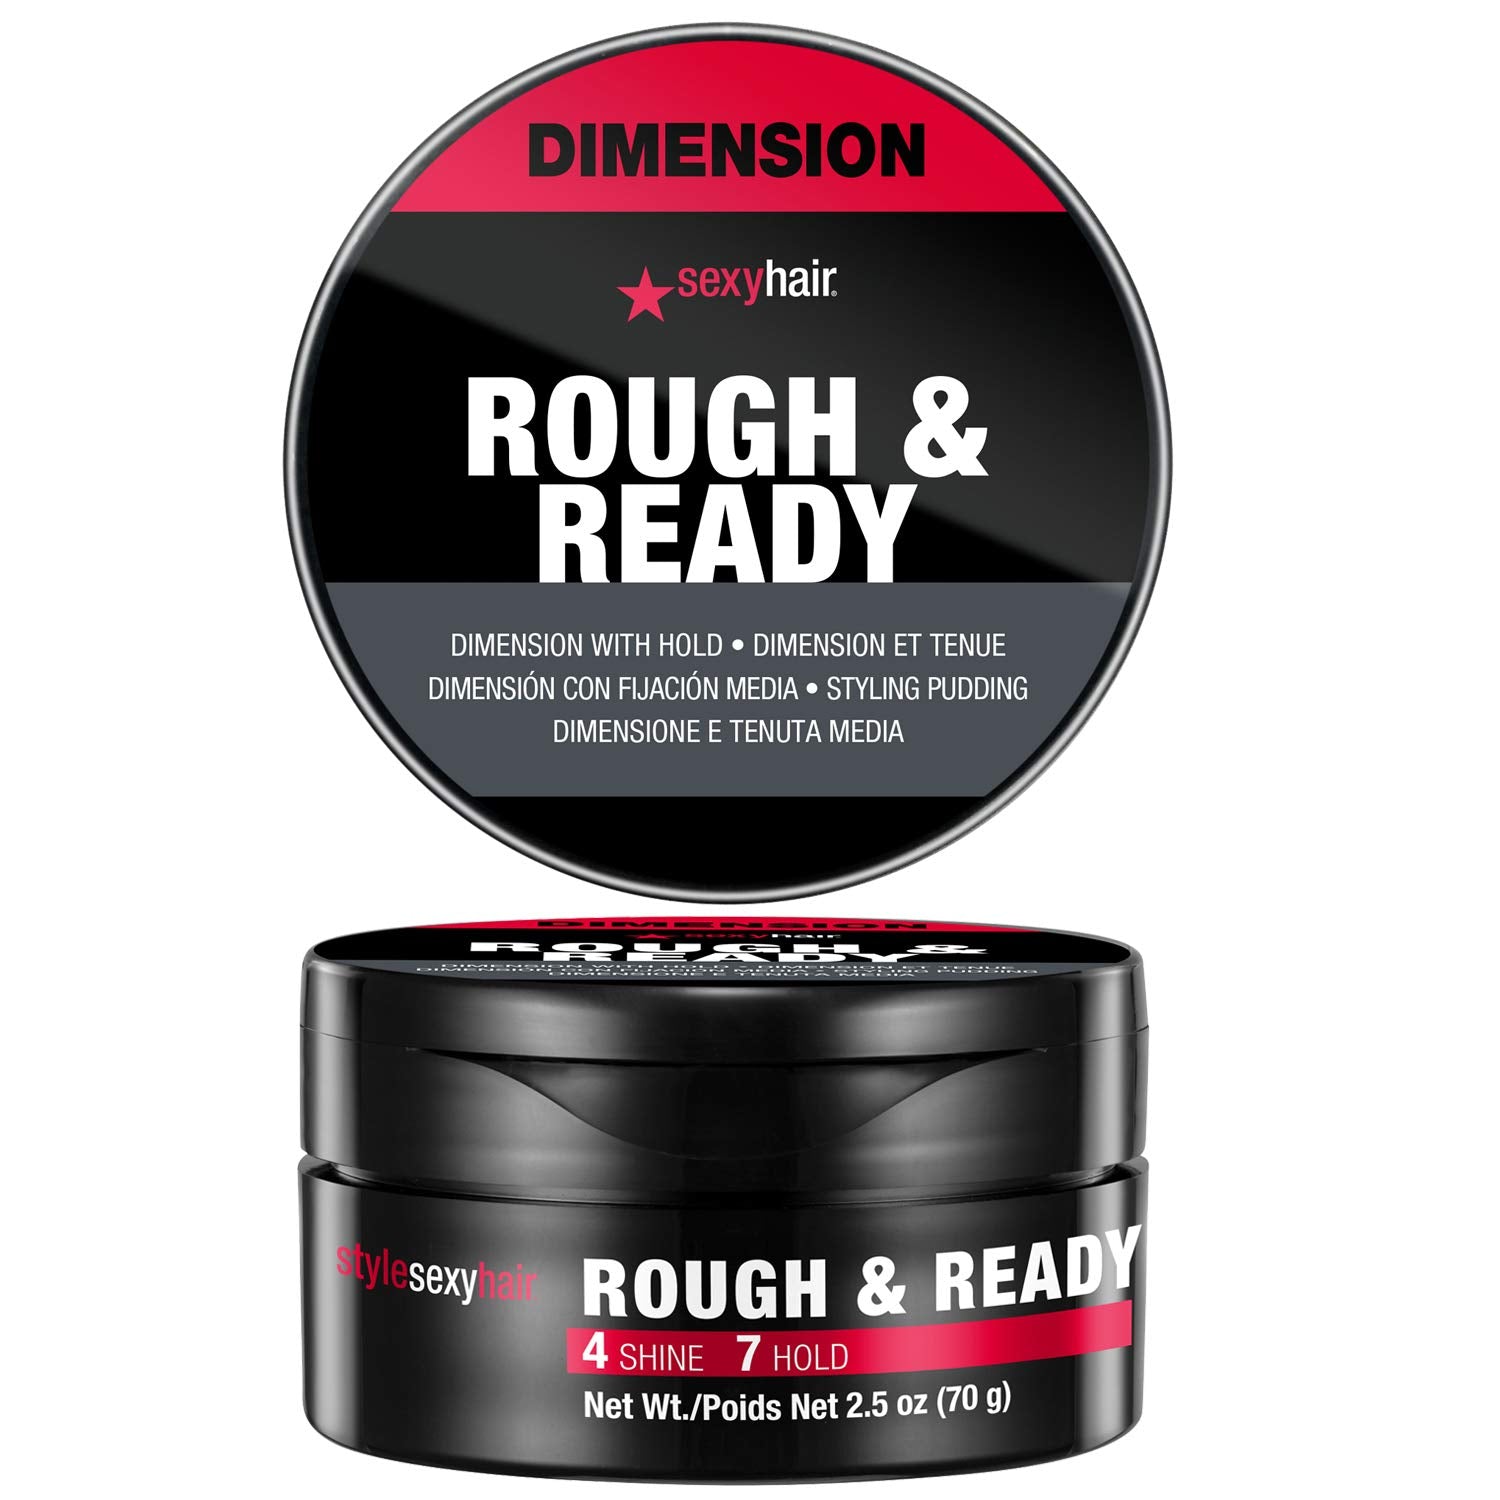 SexyHair Style Rough & Ready Dimension with Hold Styling Putty - 2.5 oz (Buy 3 Get 1 Free Mix & Match)